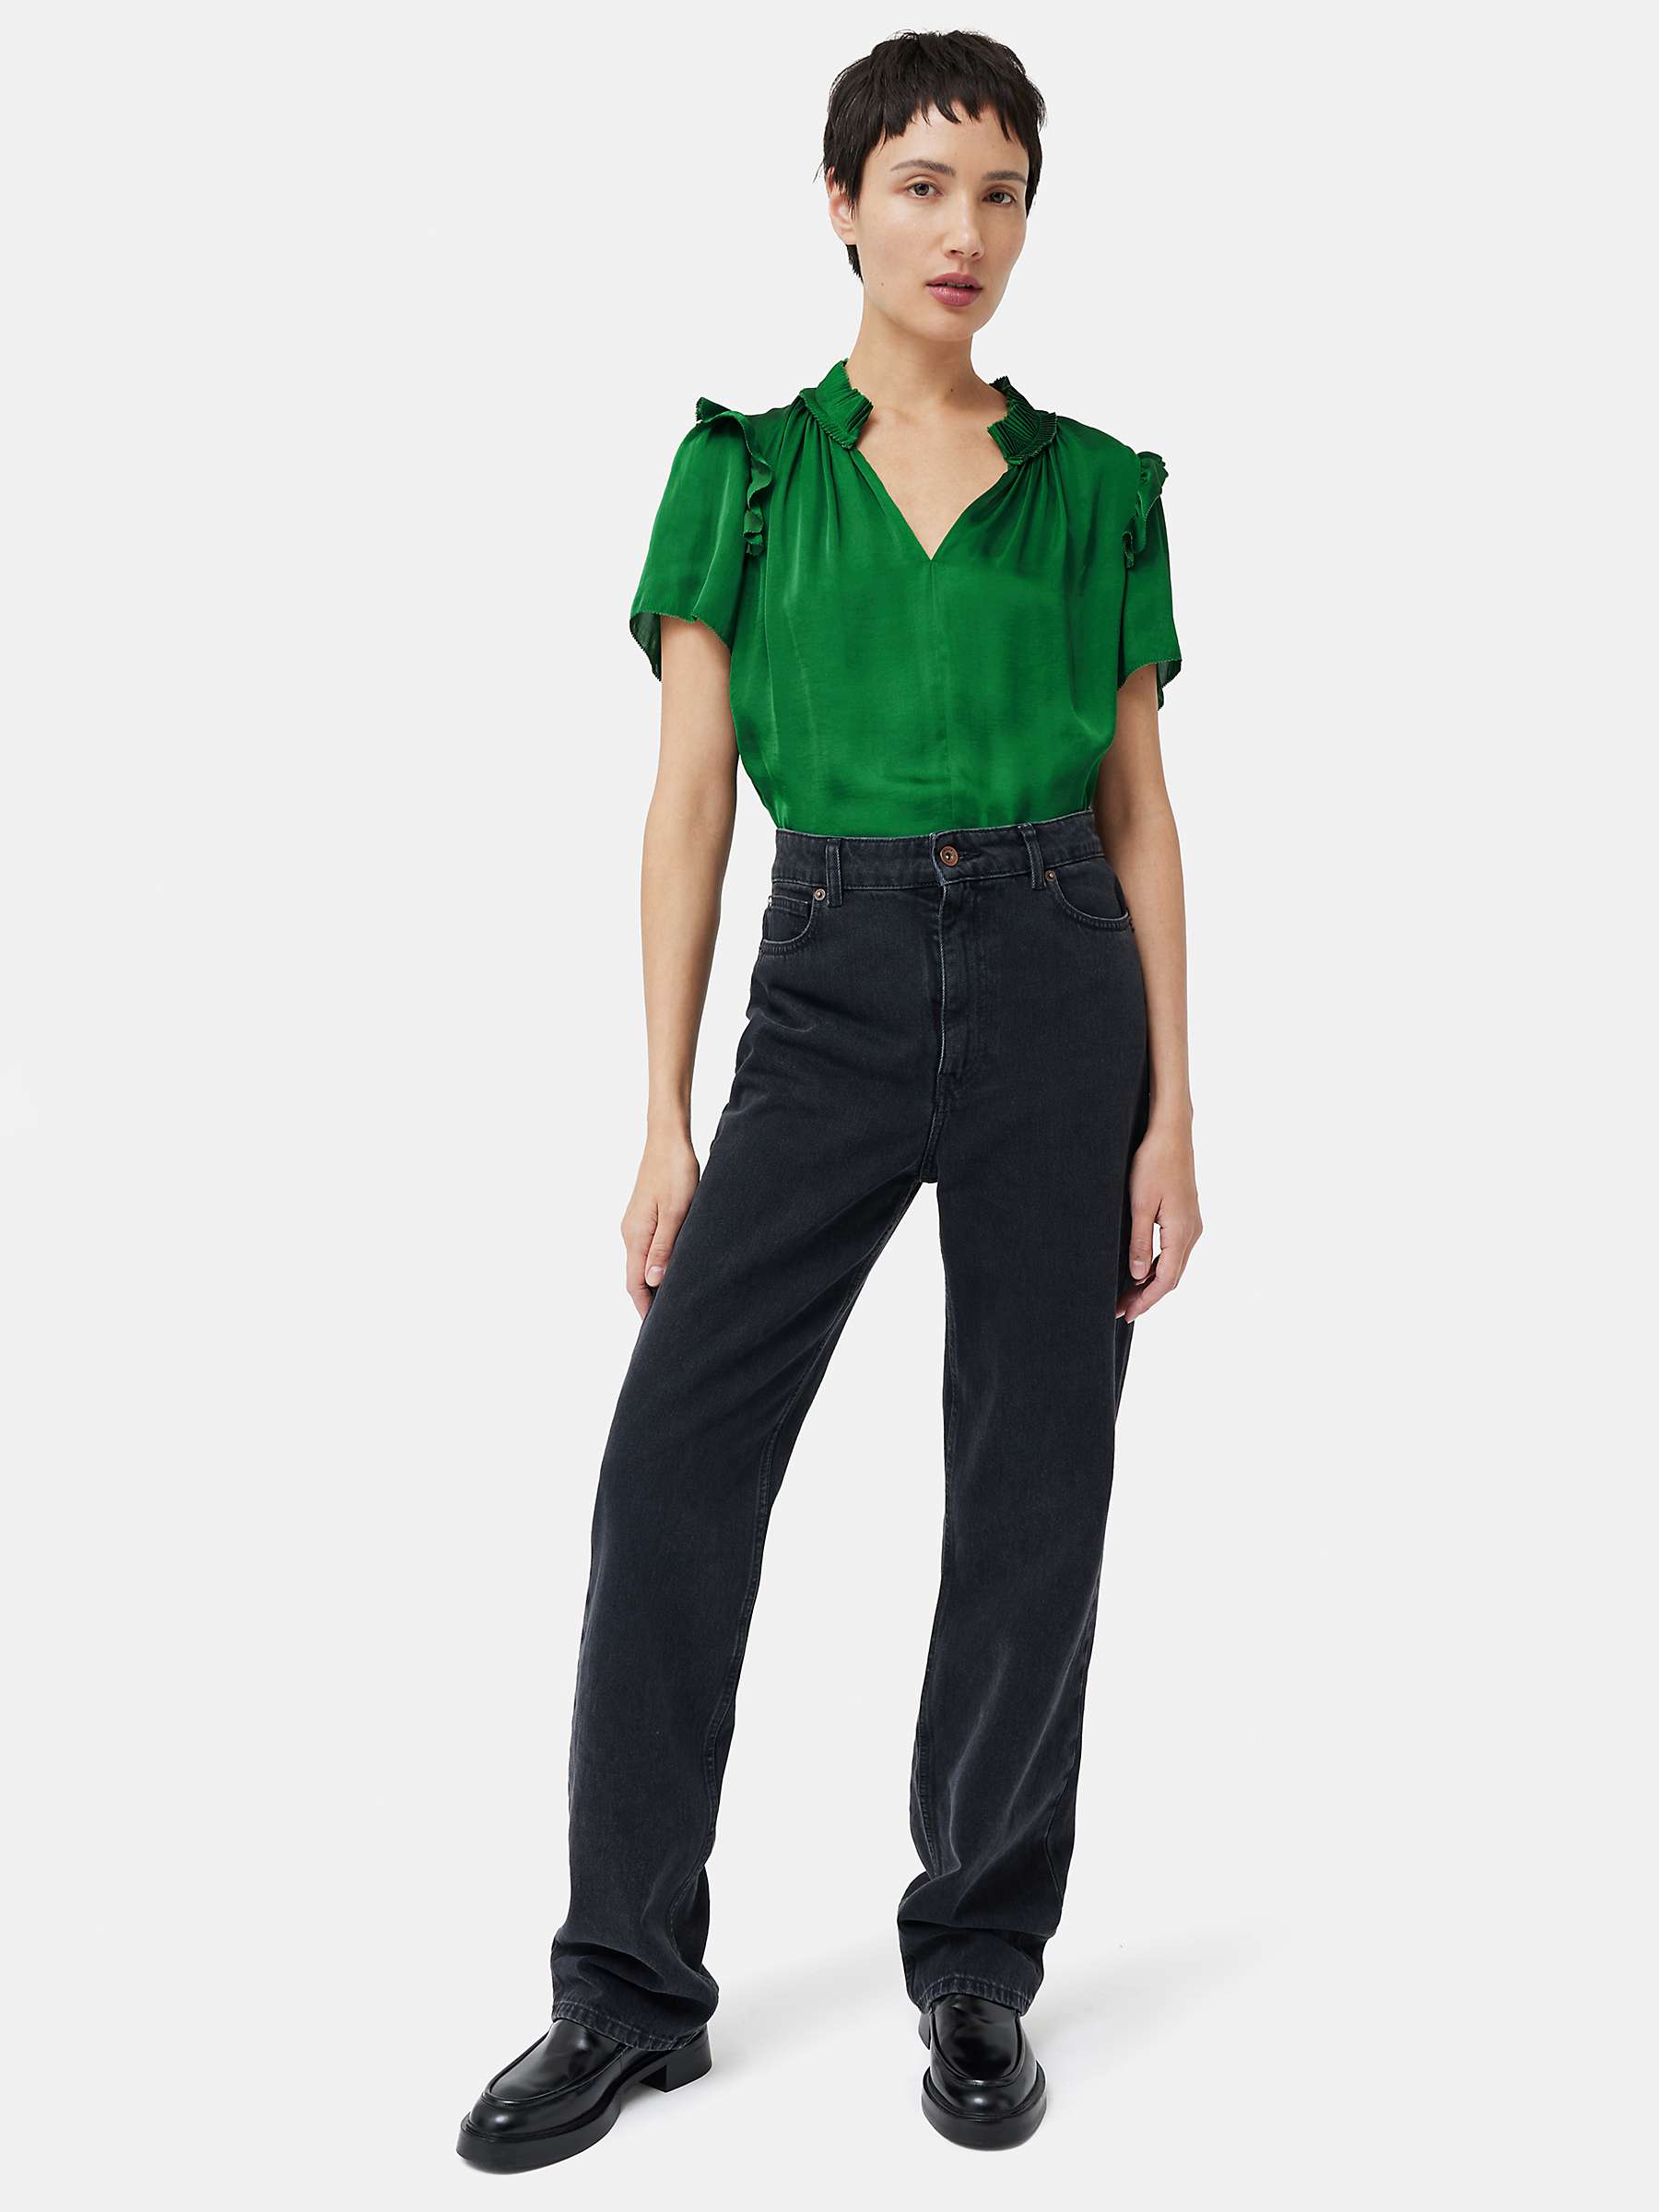 Buy Jigsaw Recycled Satin Ruffle Top Online at johnlewis.com